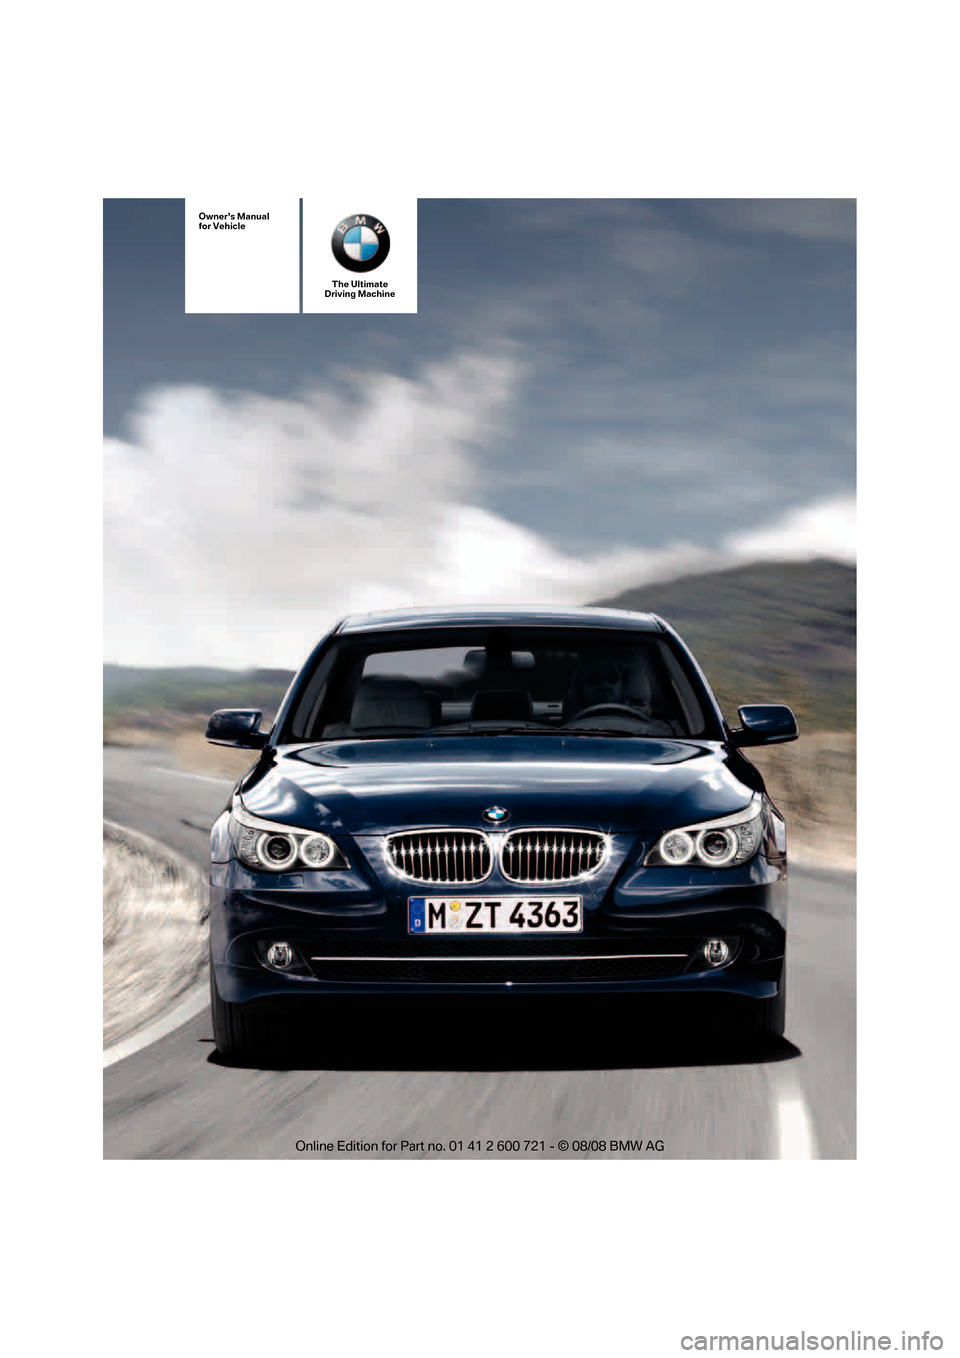 BMW 550I TOURING 2009 E61 Owners Manual The Ultimate
Driving Machine
Owners Manual
for Vehicle 